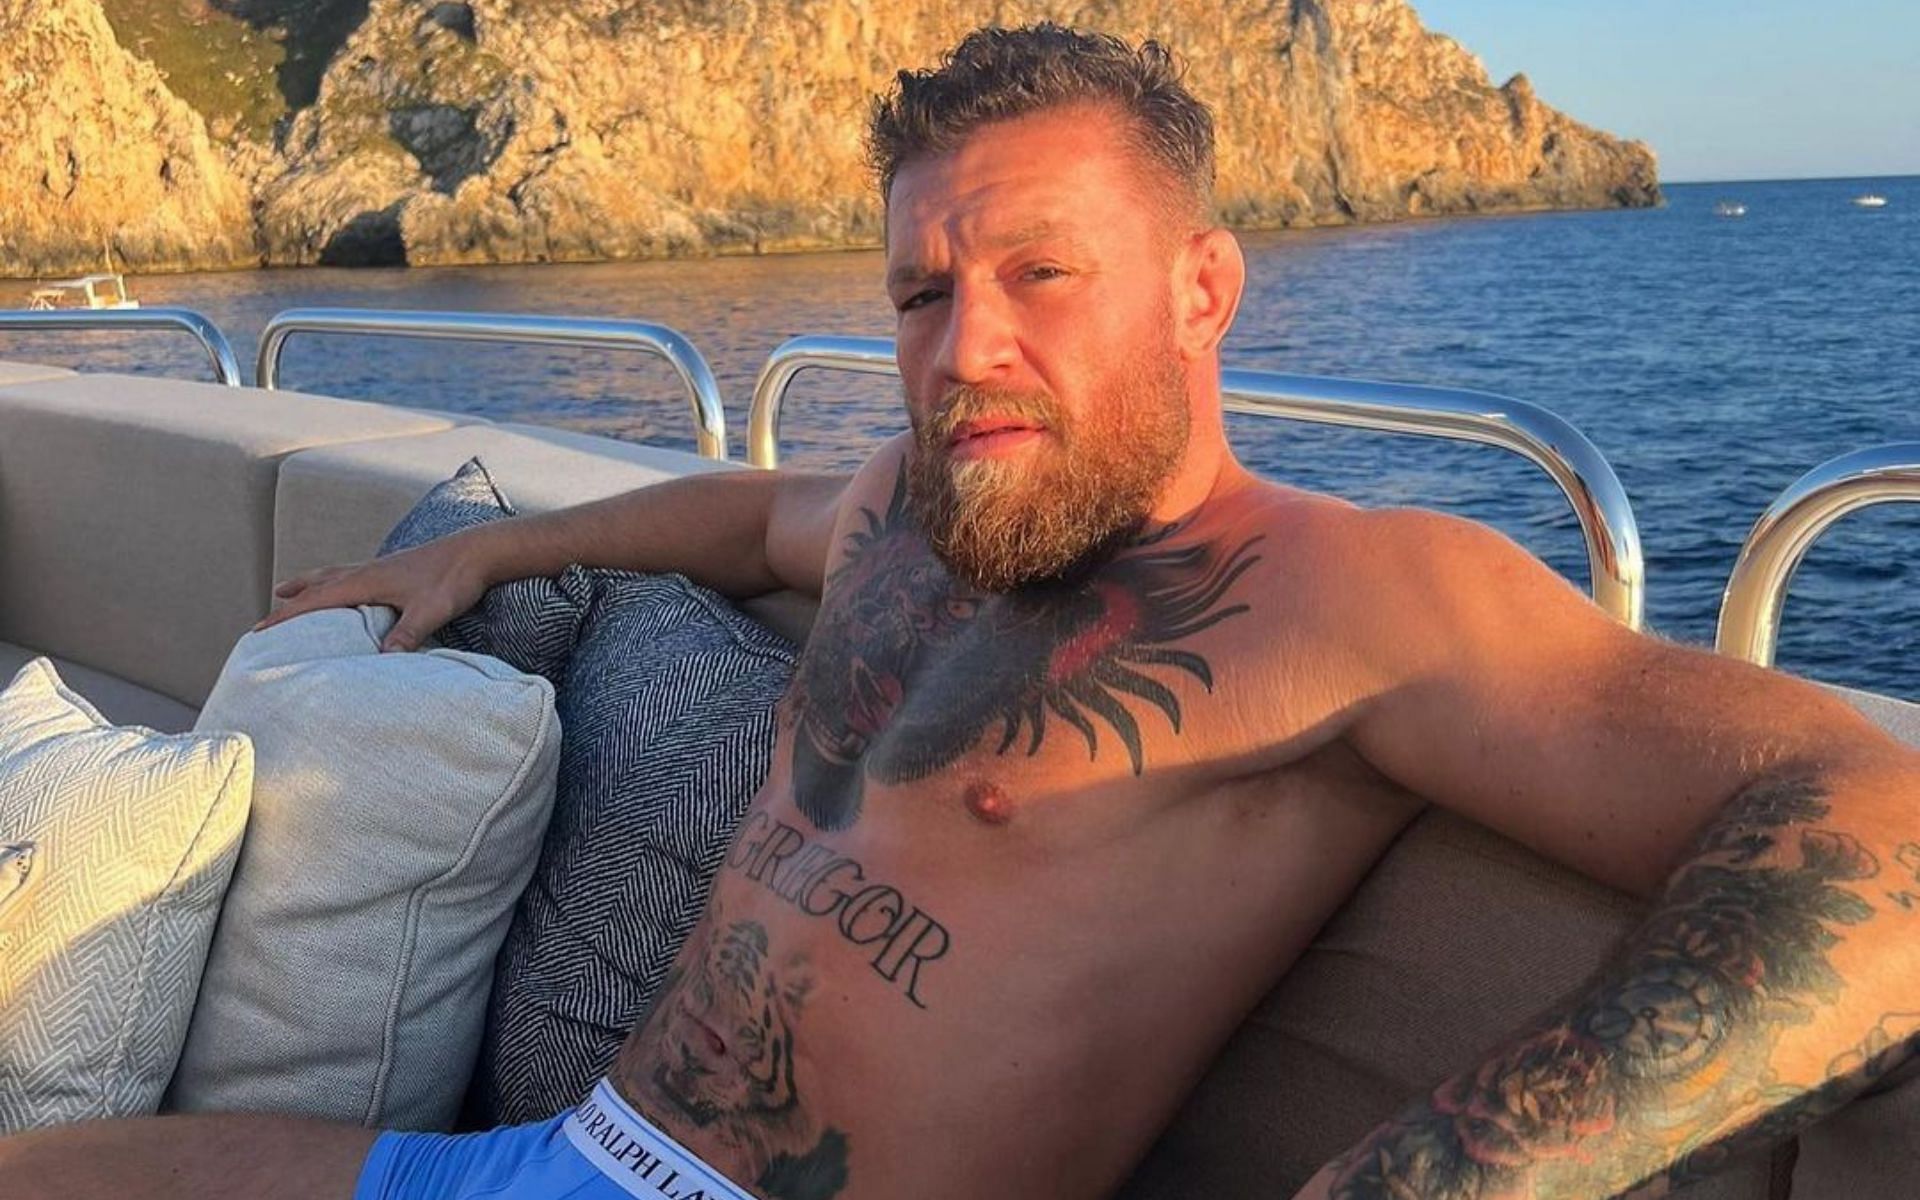 Conor McGregor on his super yahct [Photo via @thenotoriousmma on Instagram]